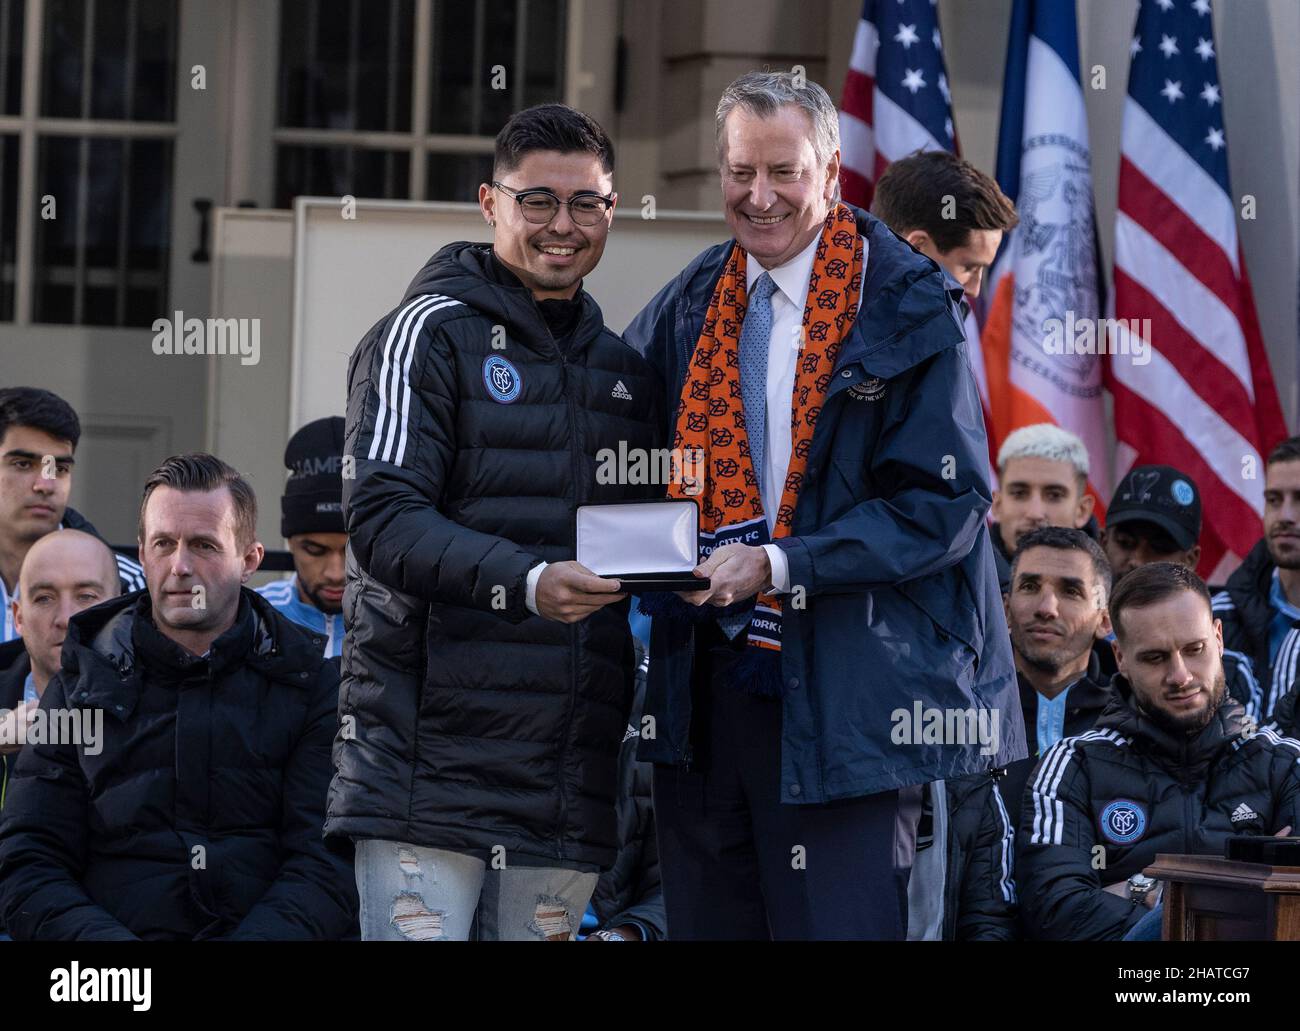 New York, USA. 14th Dec, 2021. Goalkeeper Luis Barraza received Keys to the City from mayor Bill de Blasio during celebration for NYCFC winning the 2021 MLS Cup on City Hall steps in New York on December 14, 2021. NYCFC finished the regular season in 4th place and played almost all playoff games away. Winning the MLS Cup is the first trophy won by the franchise since it was established 7 years ago. NYCFC is part of the City Football Group which owns football clubs around the world. (Photo by Lev Radin/Sipa USA) Credit: Sipa USA/Alamy Live News Stock Photo